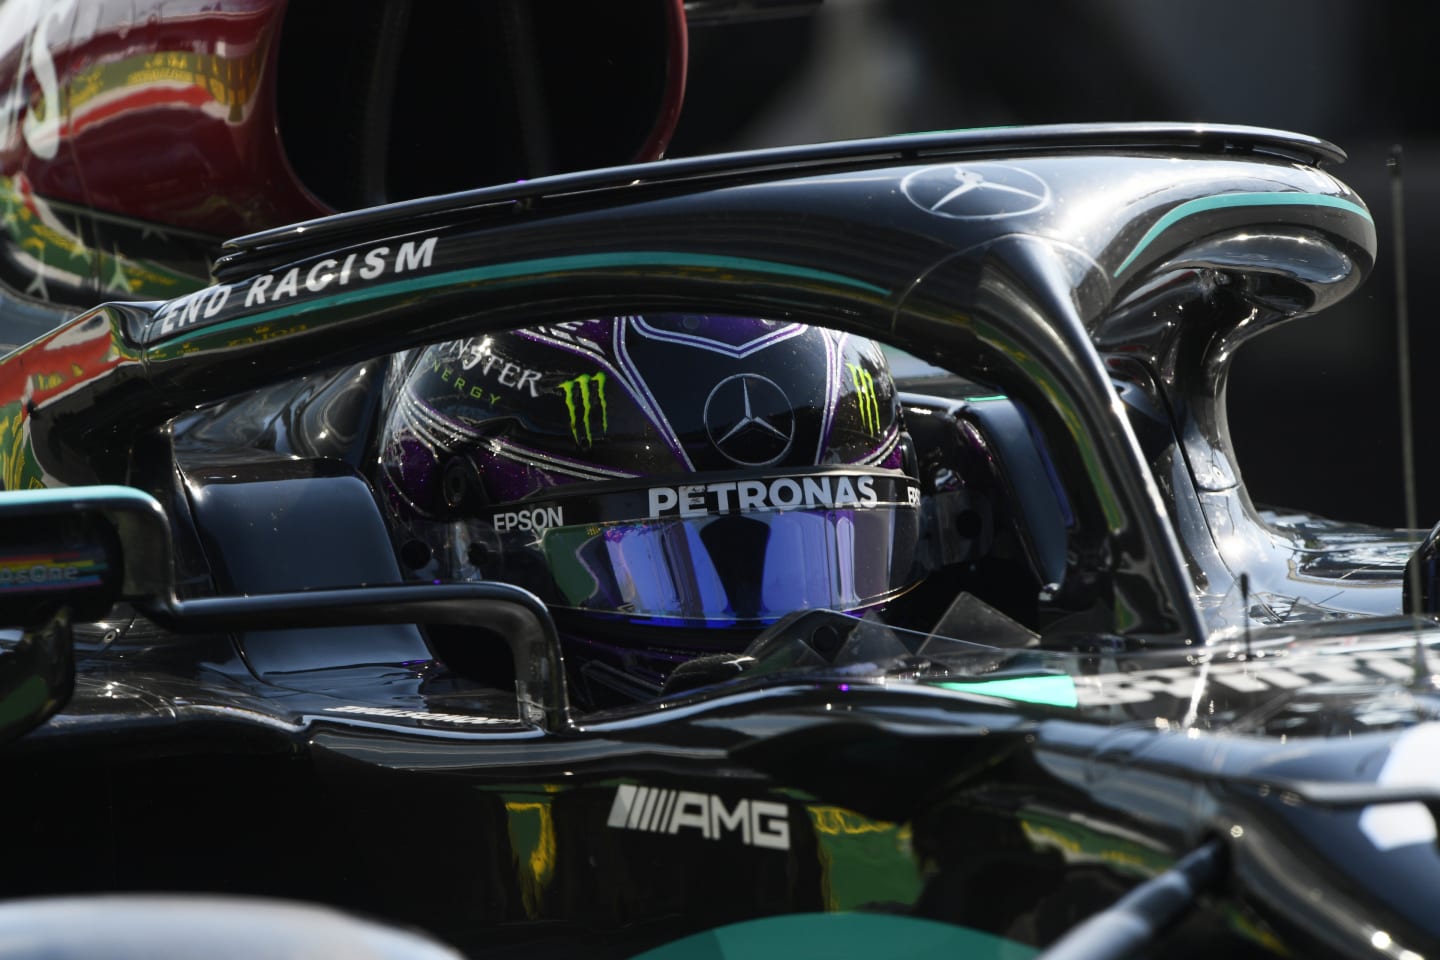 MONZA, ITALY - SEPTEMBER 06: Lewis Hamilton of Great Britain driving the (44) Mercedes AMG Petronas